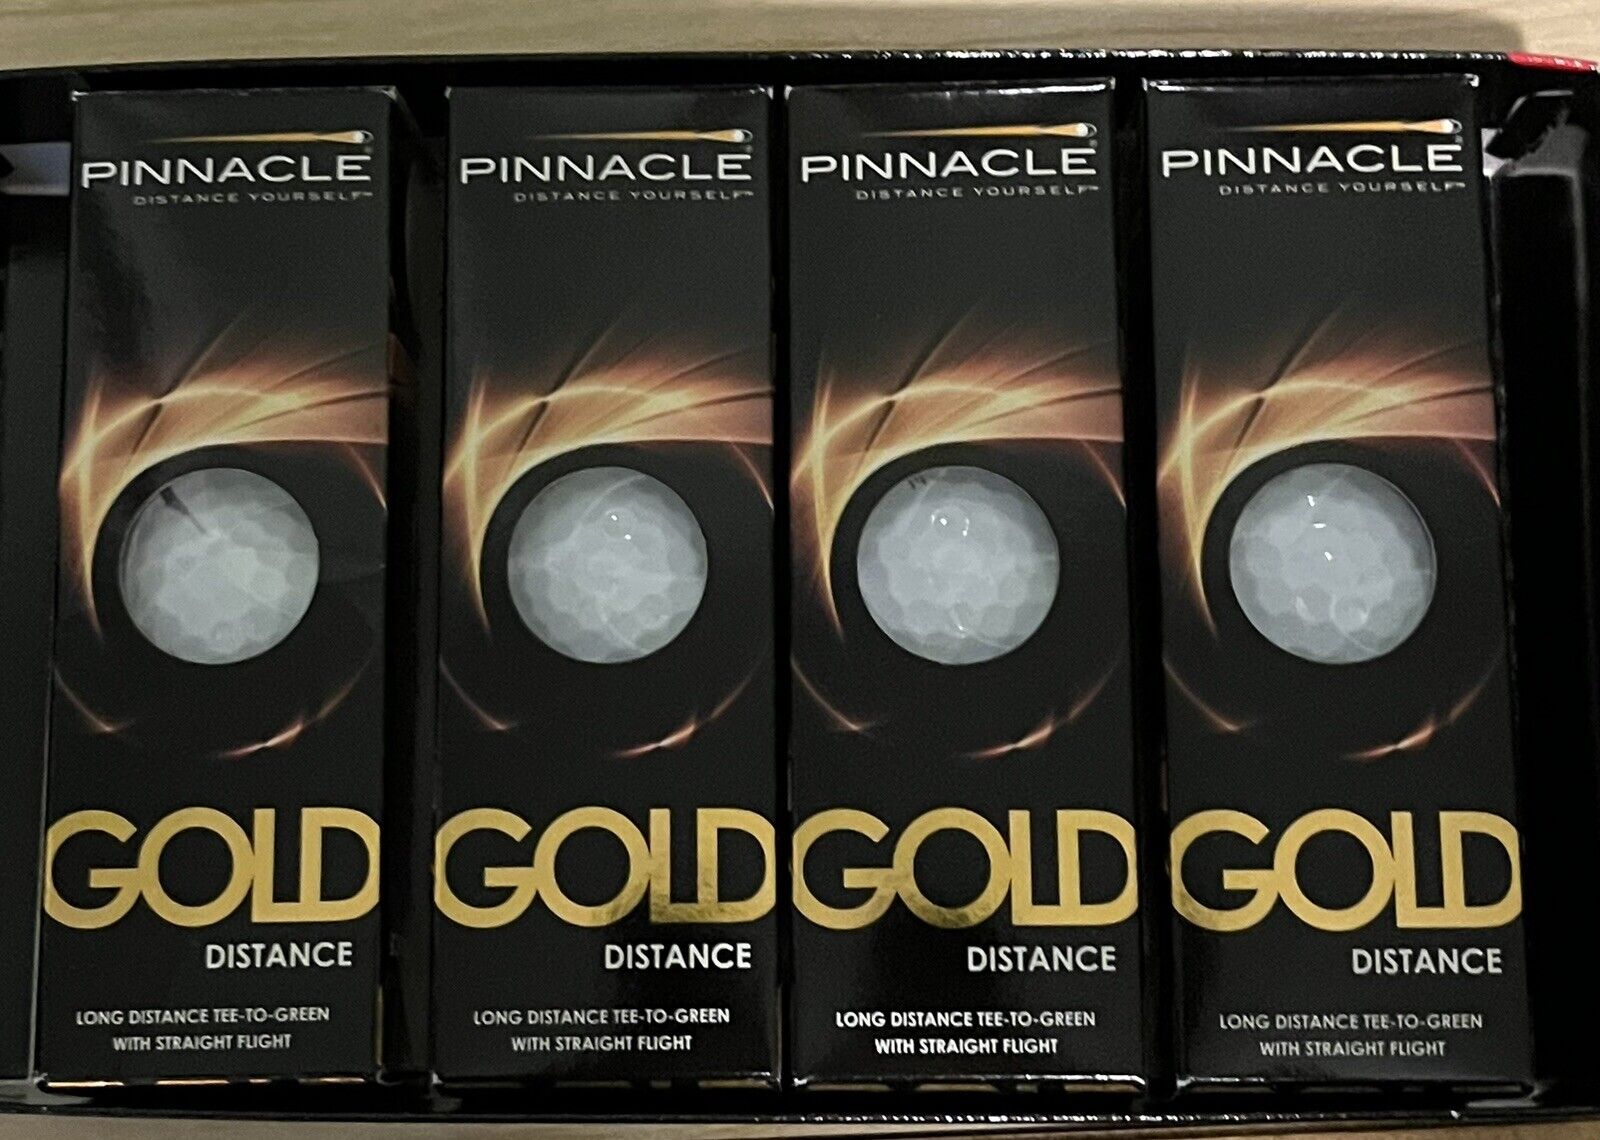 Pinnacle Gold Distance Golf Balls Lot of 4 Packs of 3. 12 BALLS in all NEW